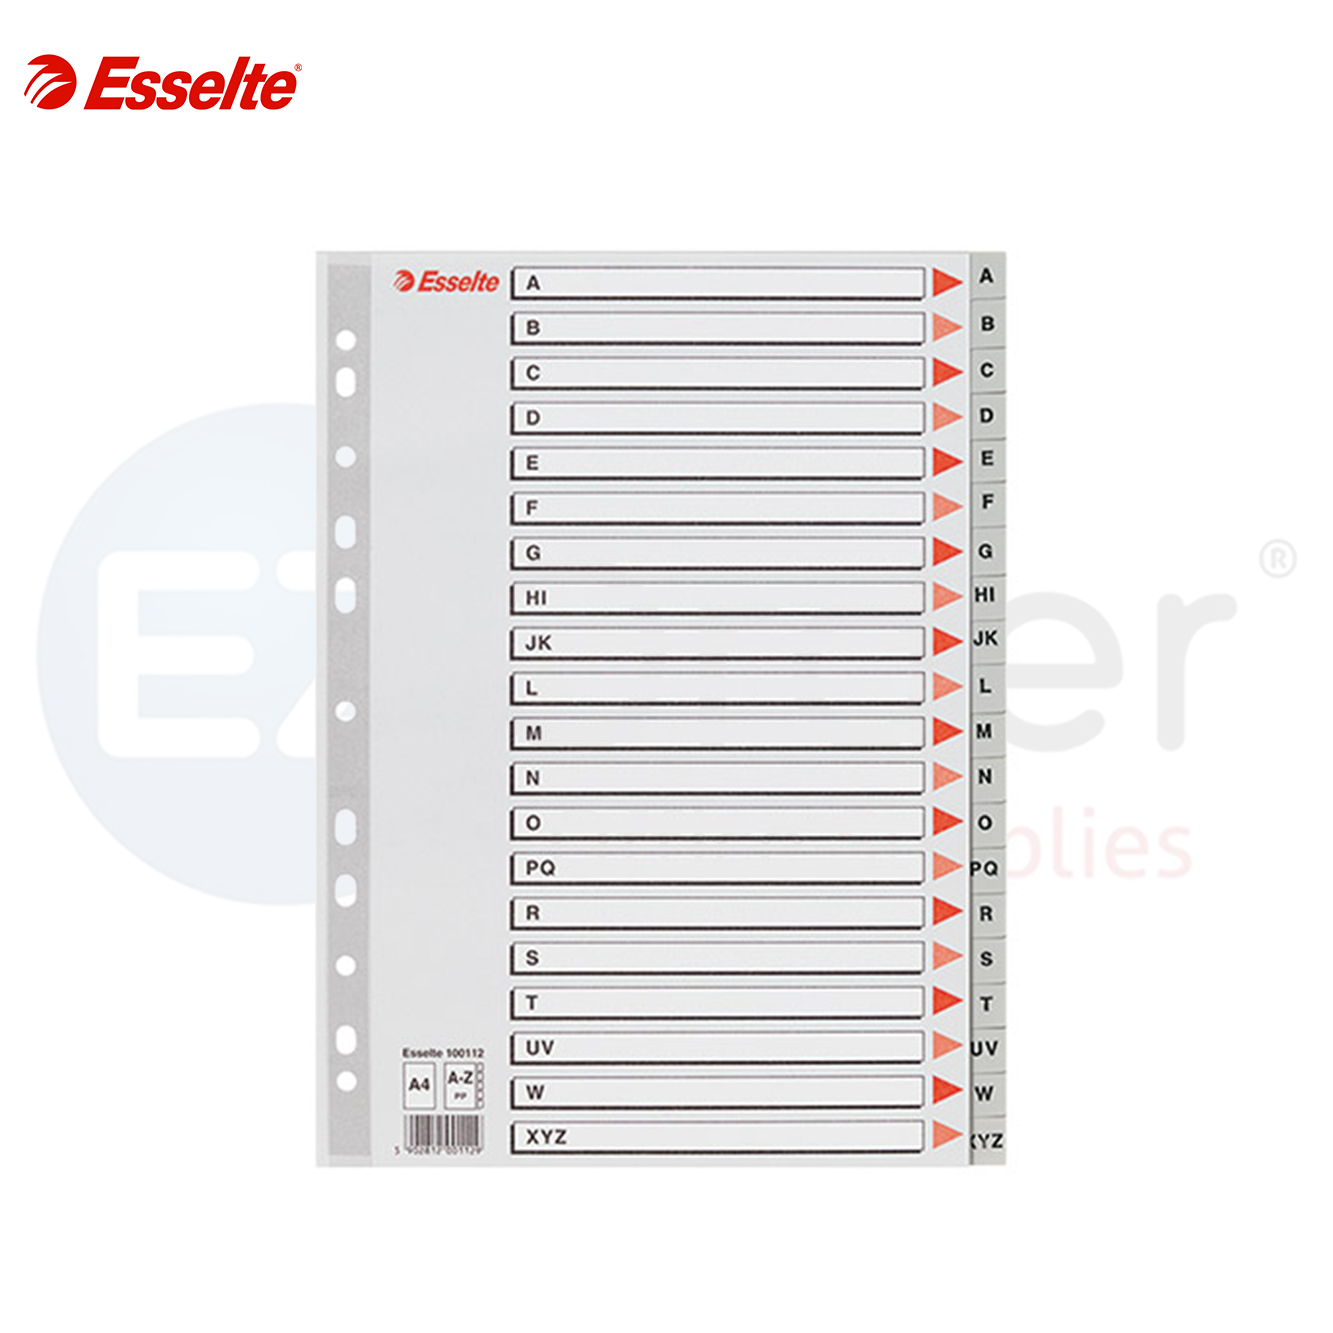 Esselte A-Z plastic dividers grey